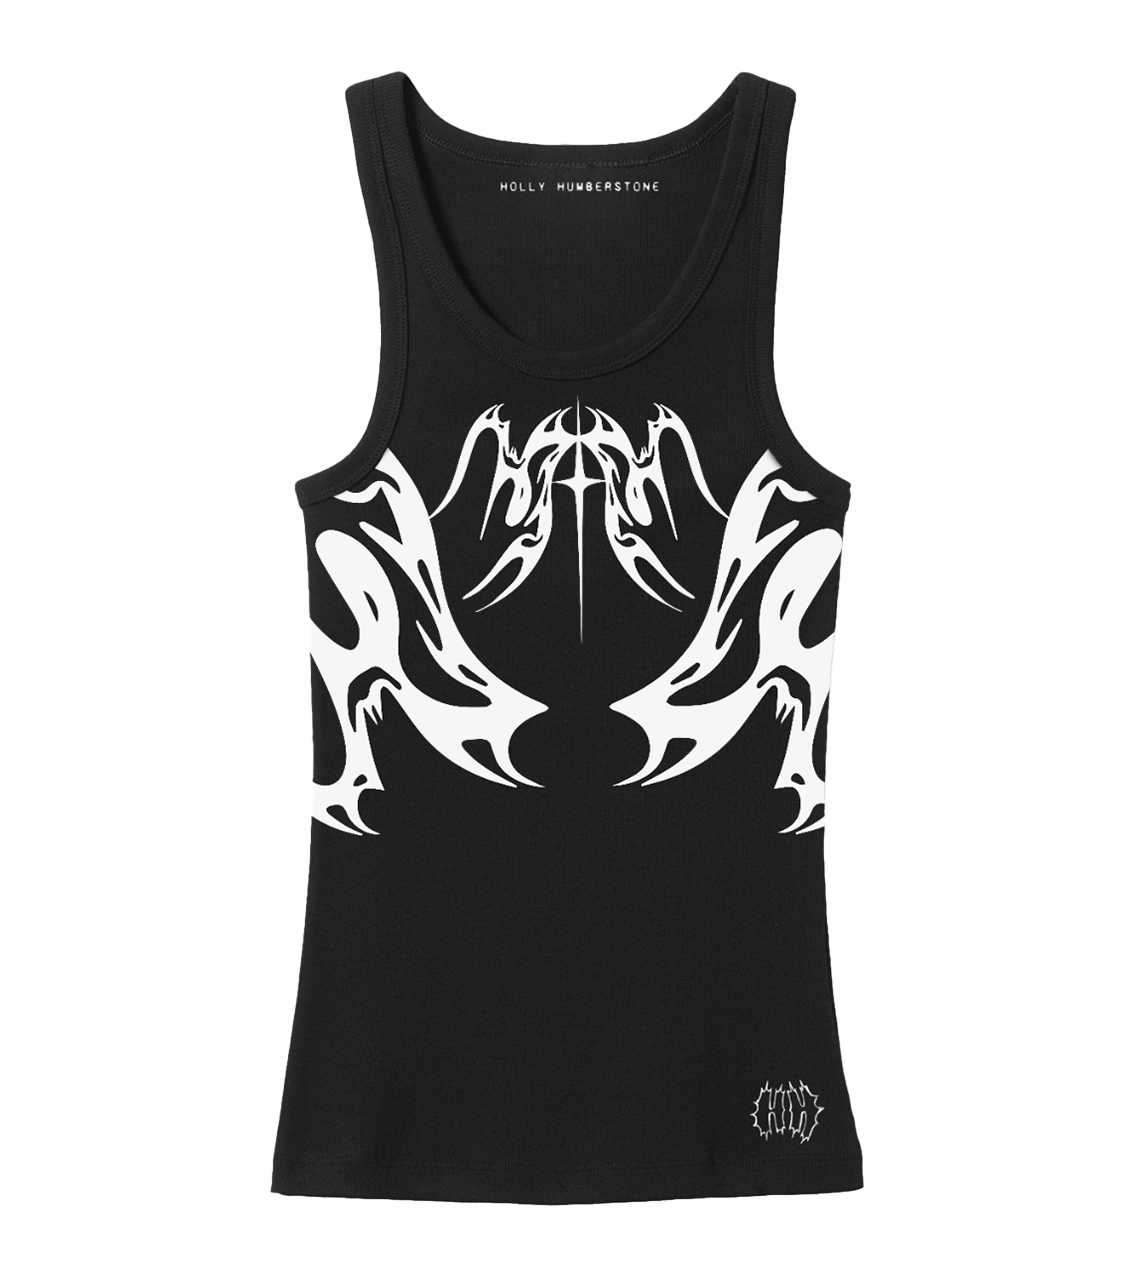 Holly Humberstone - Holly Humberstone Black Antichrist Vest